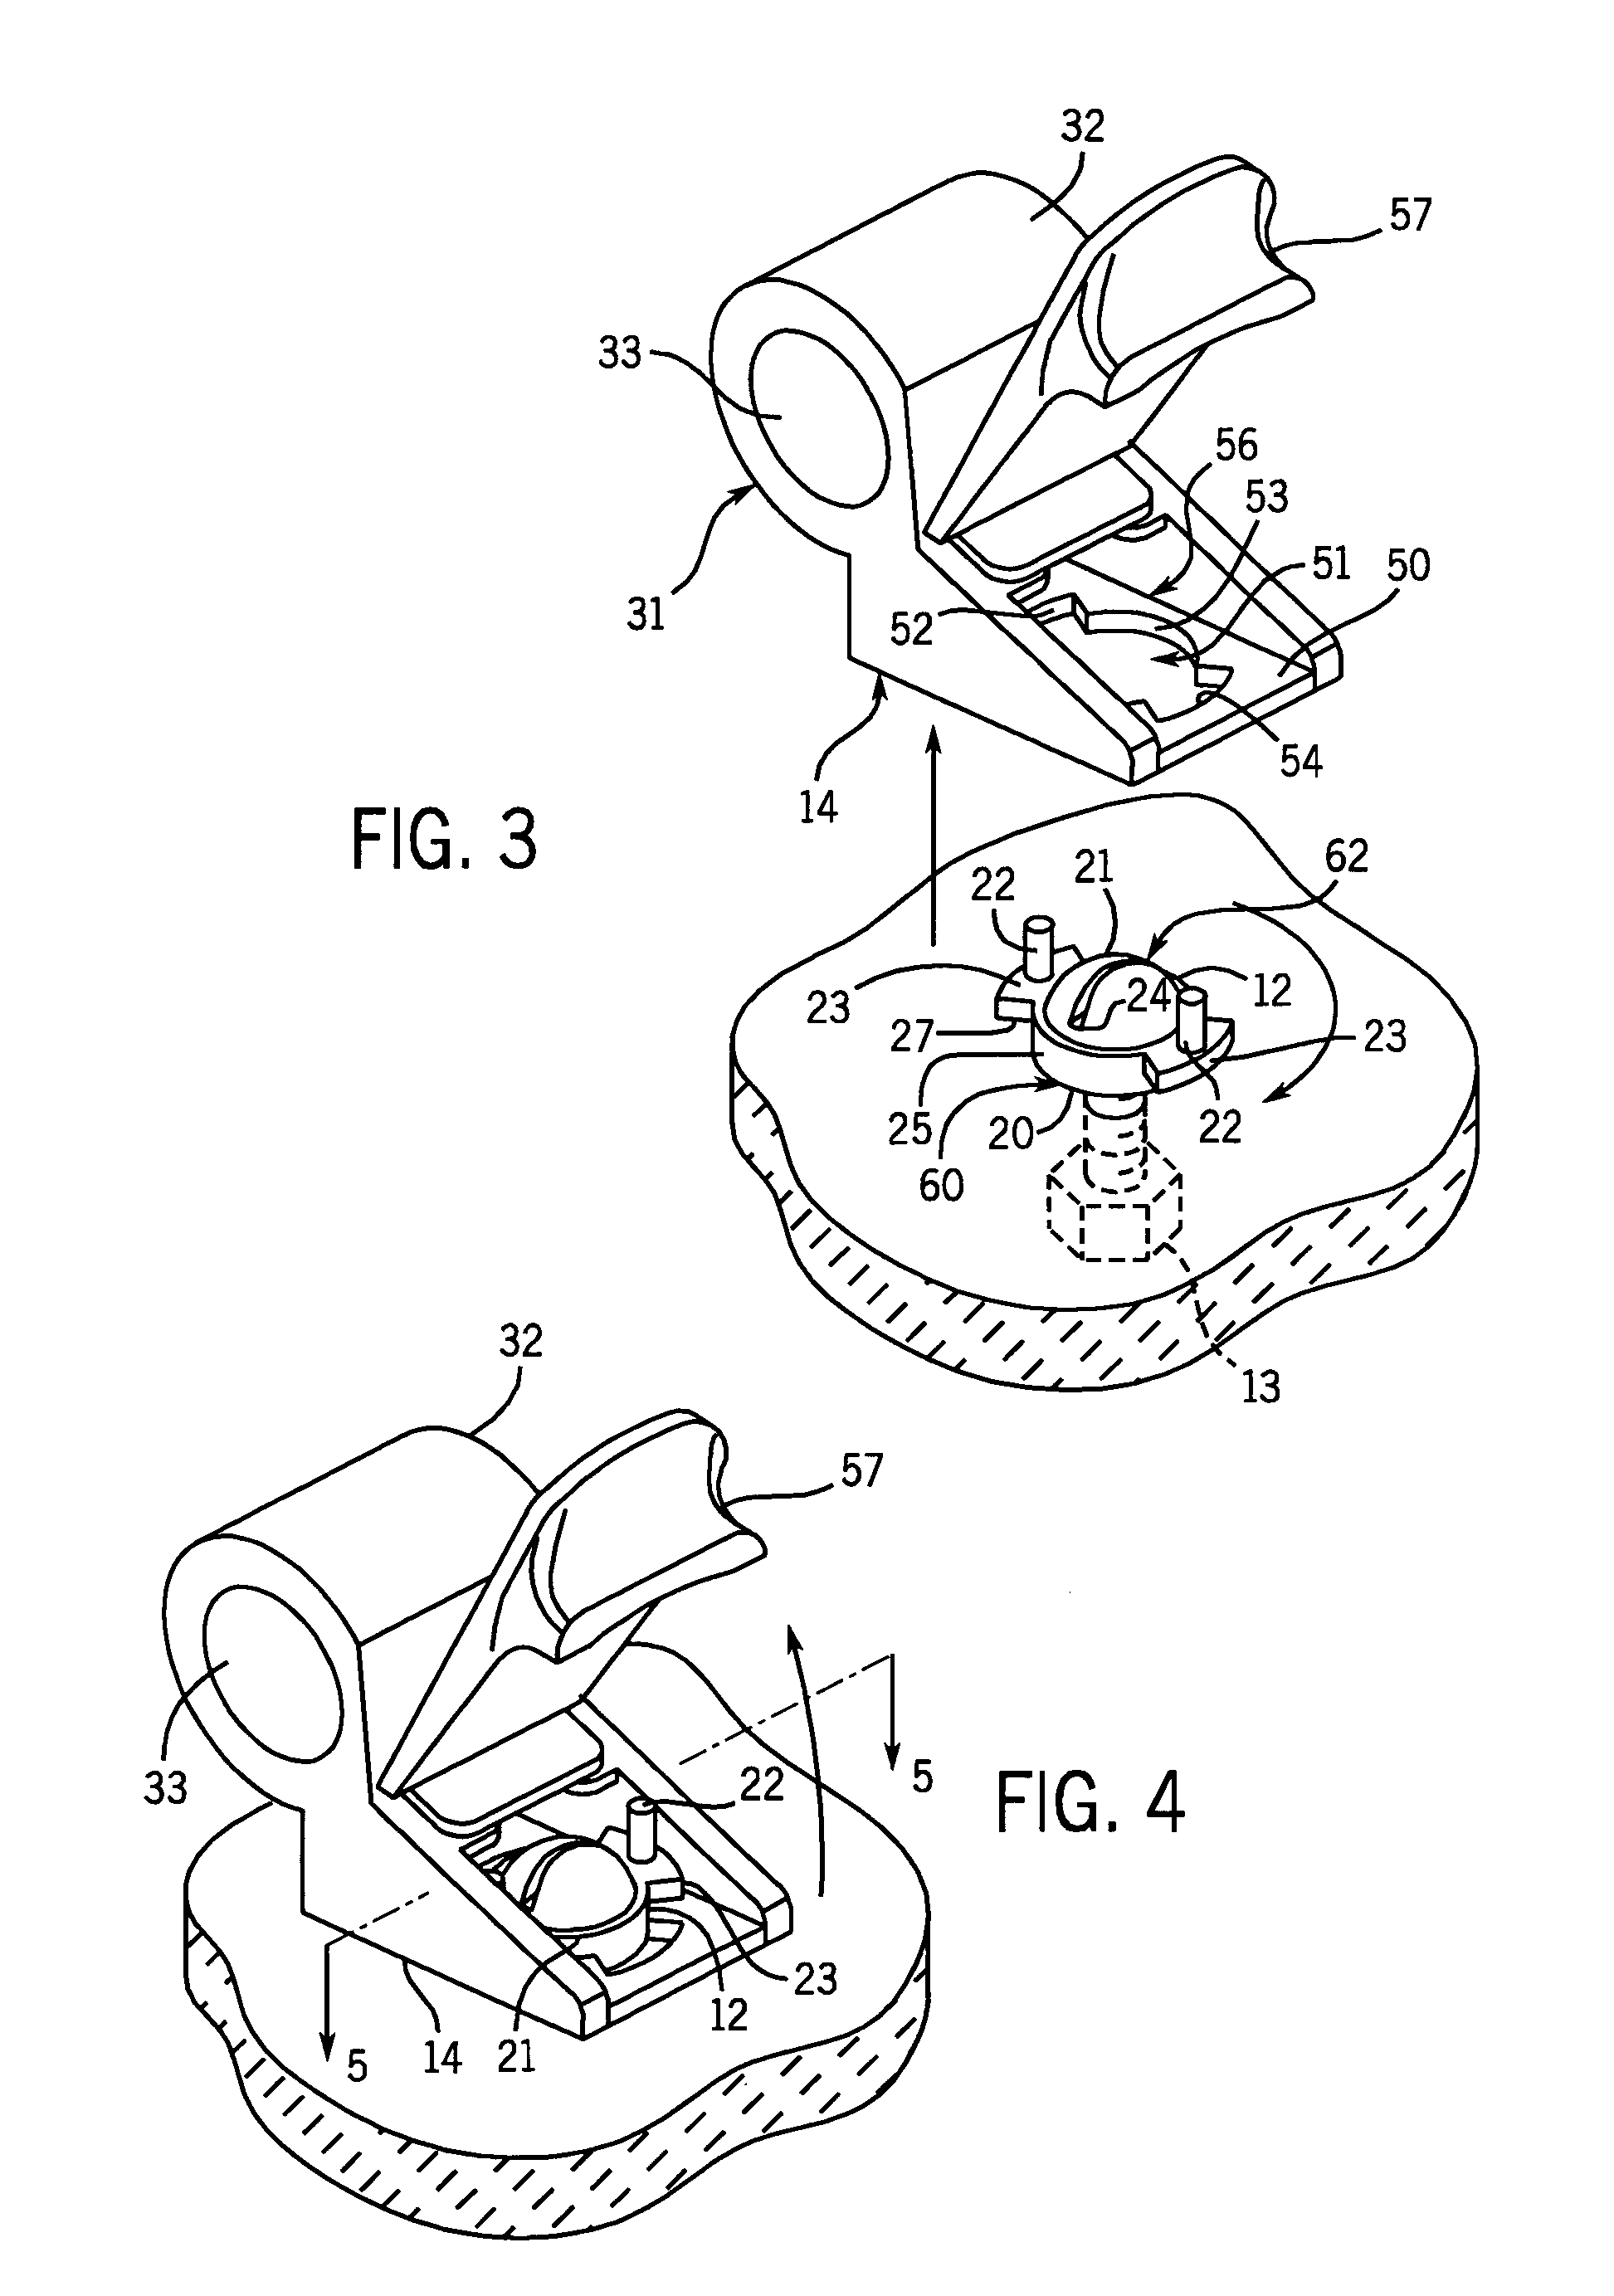 Releasable toilet seat hinge assembly